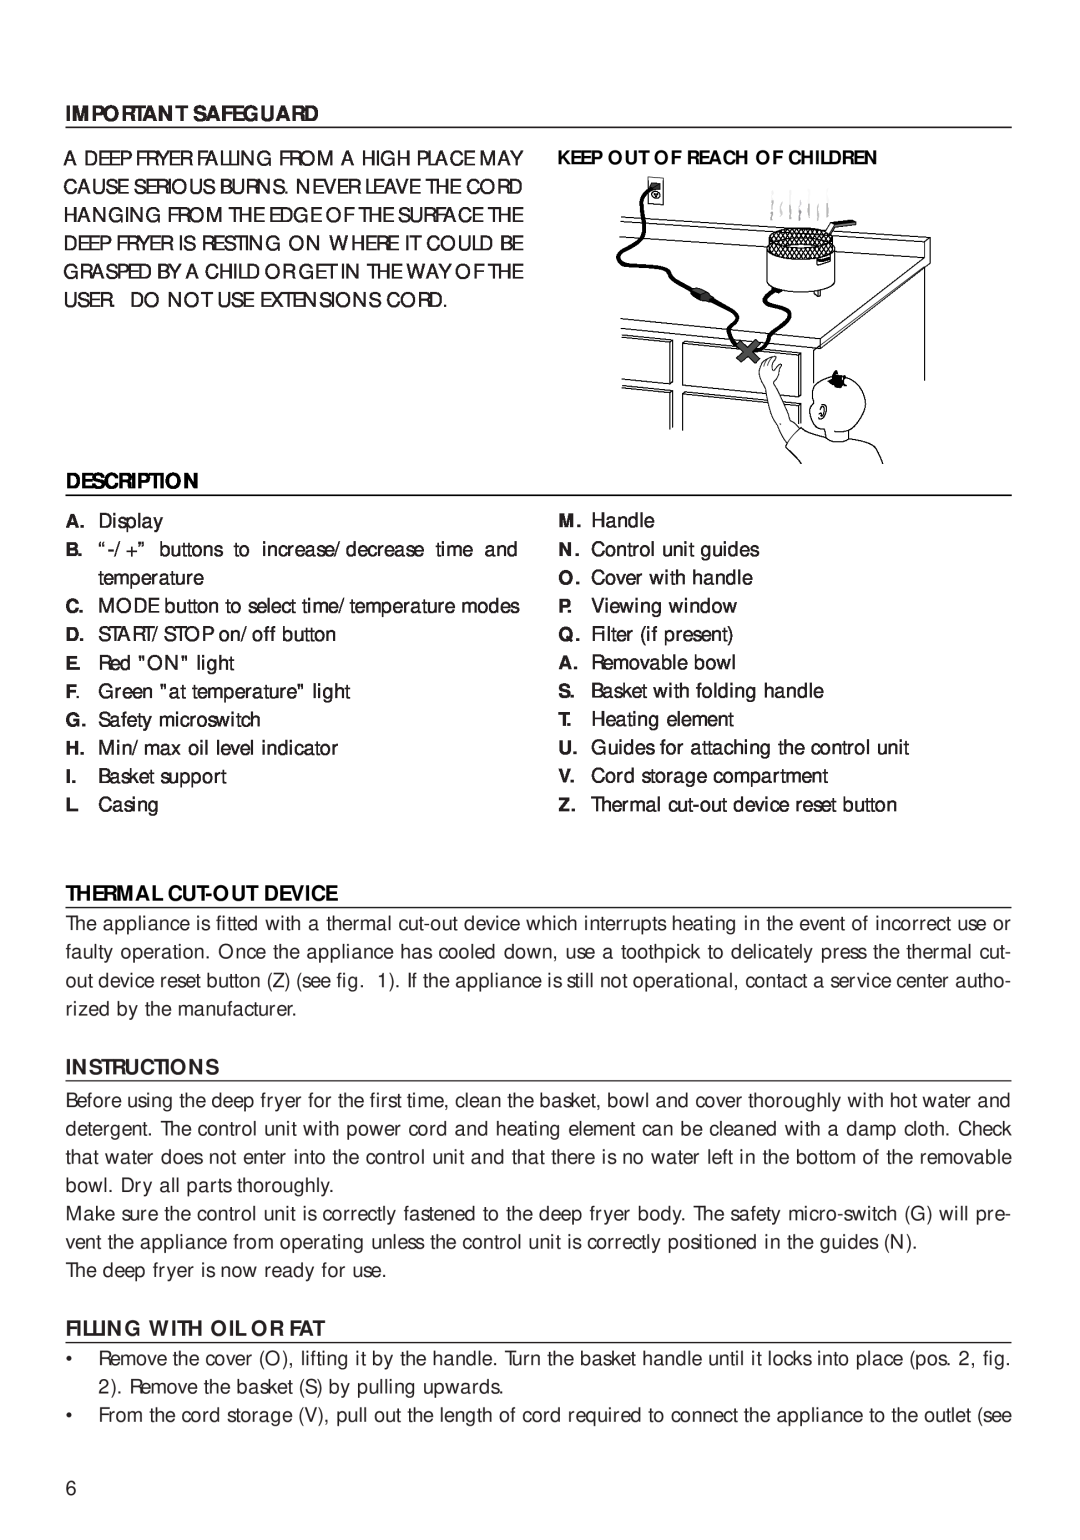 DeLonghi D14427DZ manual Important Safeguard, Description, Thermal Cut-Out Device, Instructions, Filling With Oil Or Fat 